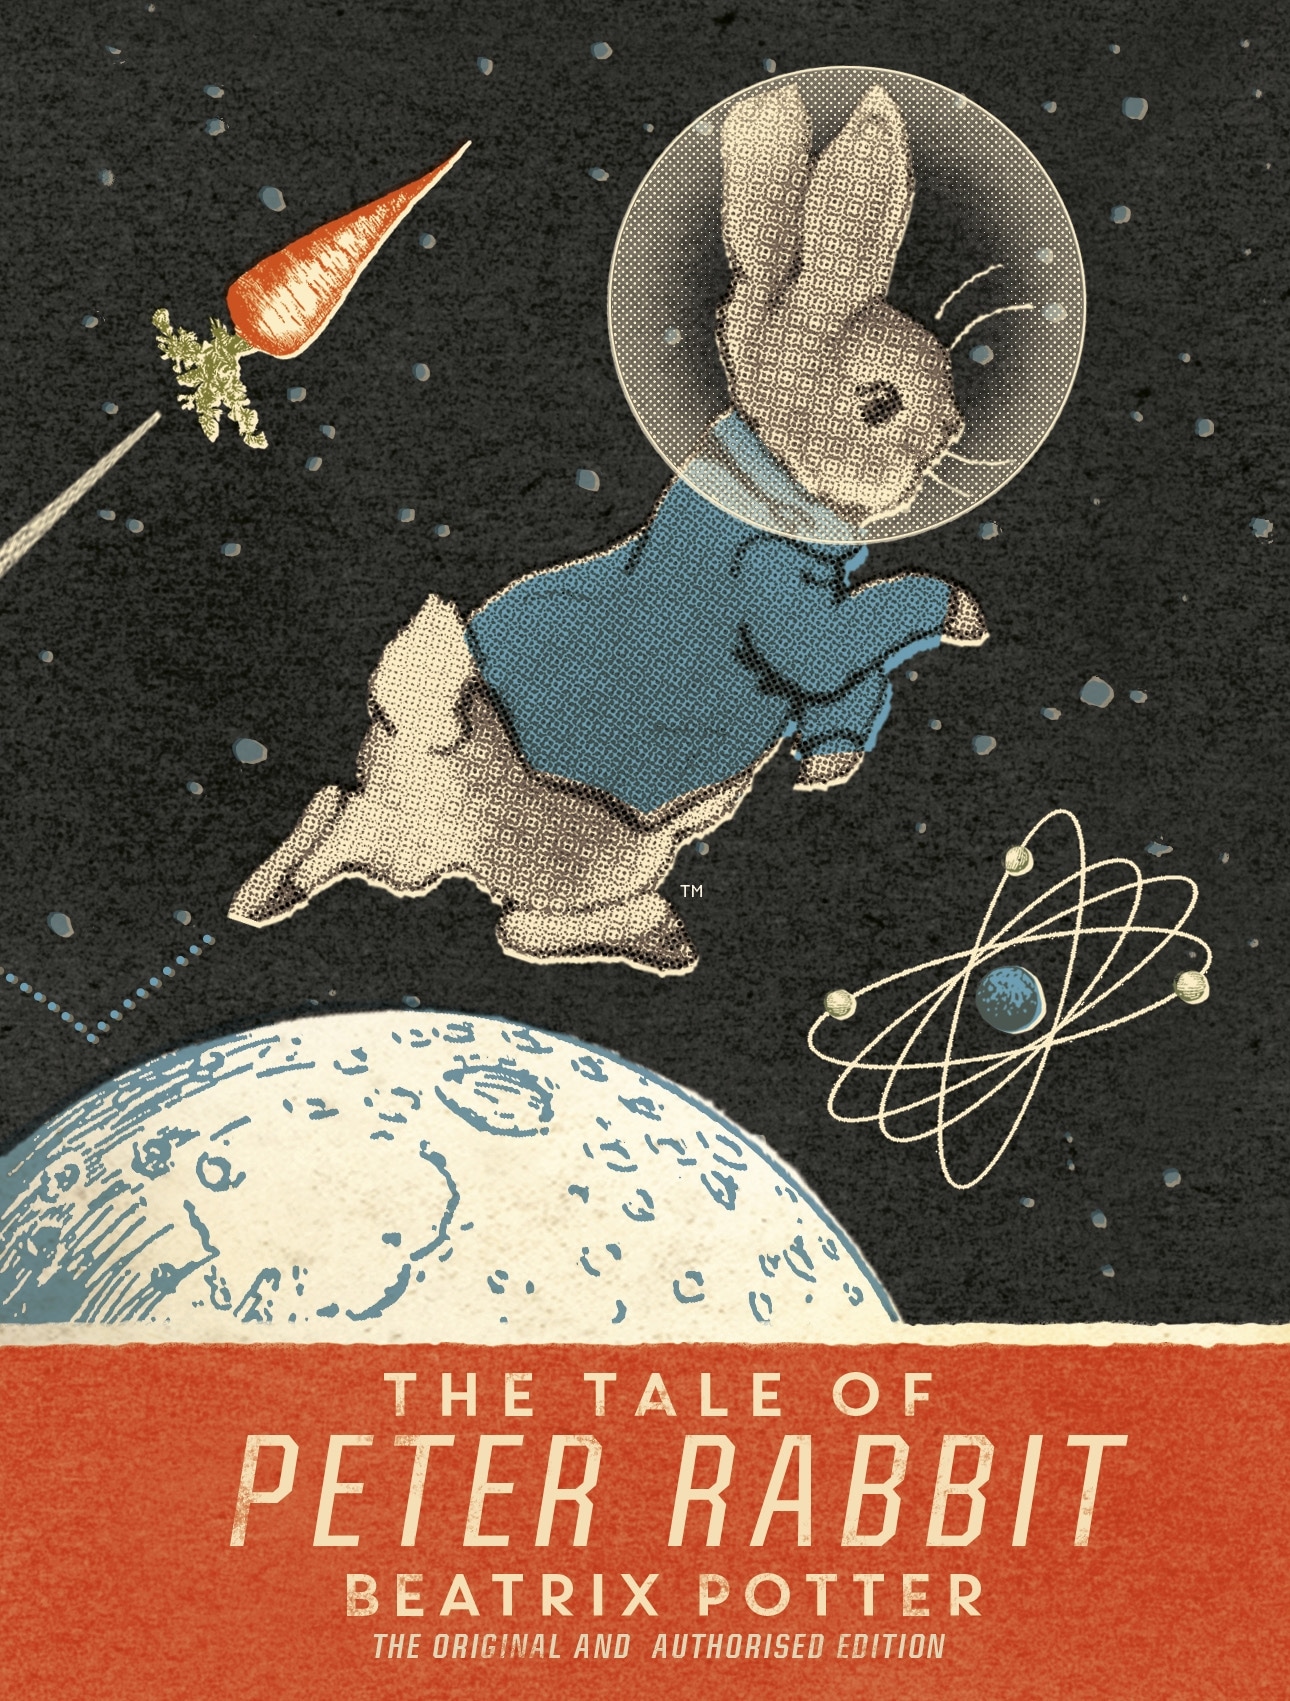 Book “The Tale Of Peter Rabbit” by Beatrix Potter — February 7, 2019